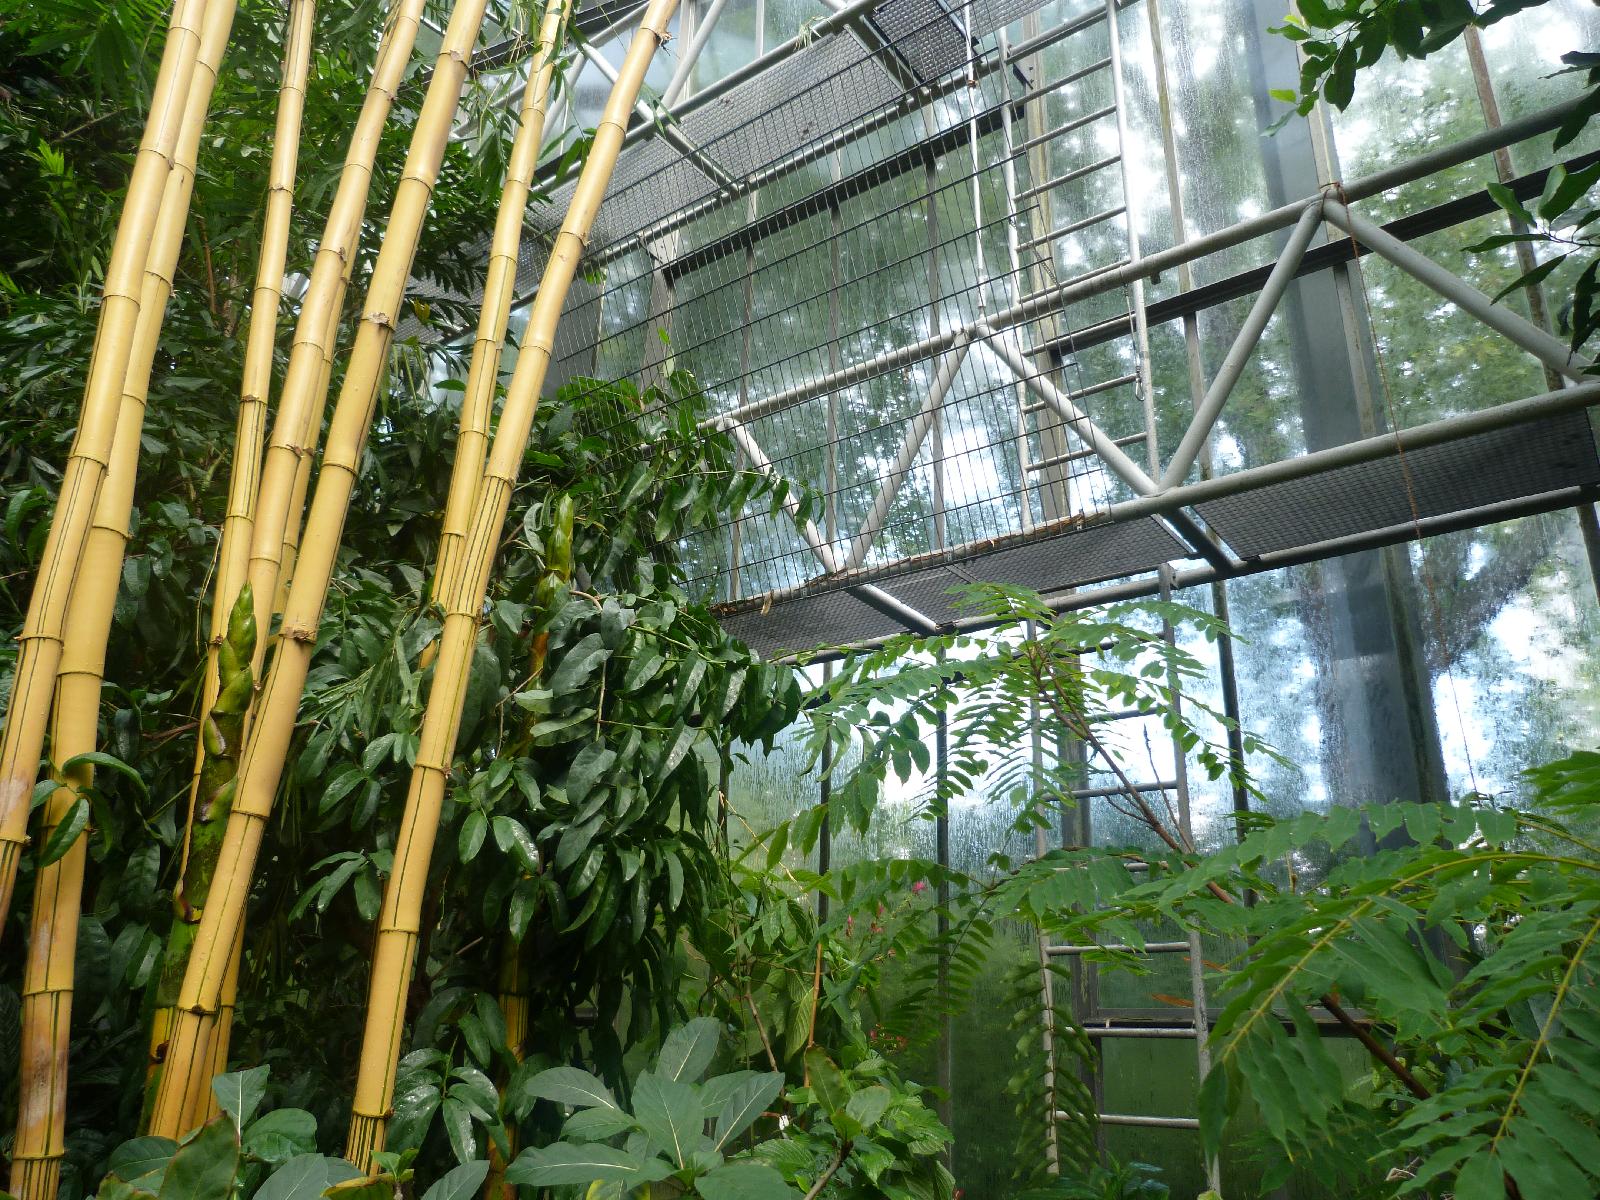 Inside the tall greenhouse